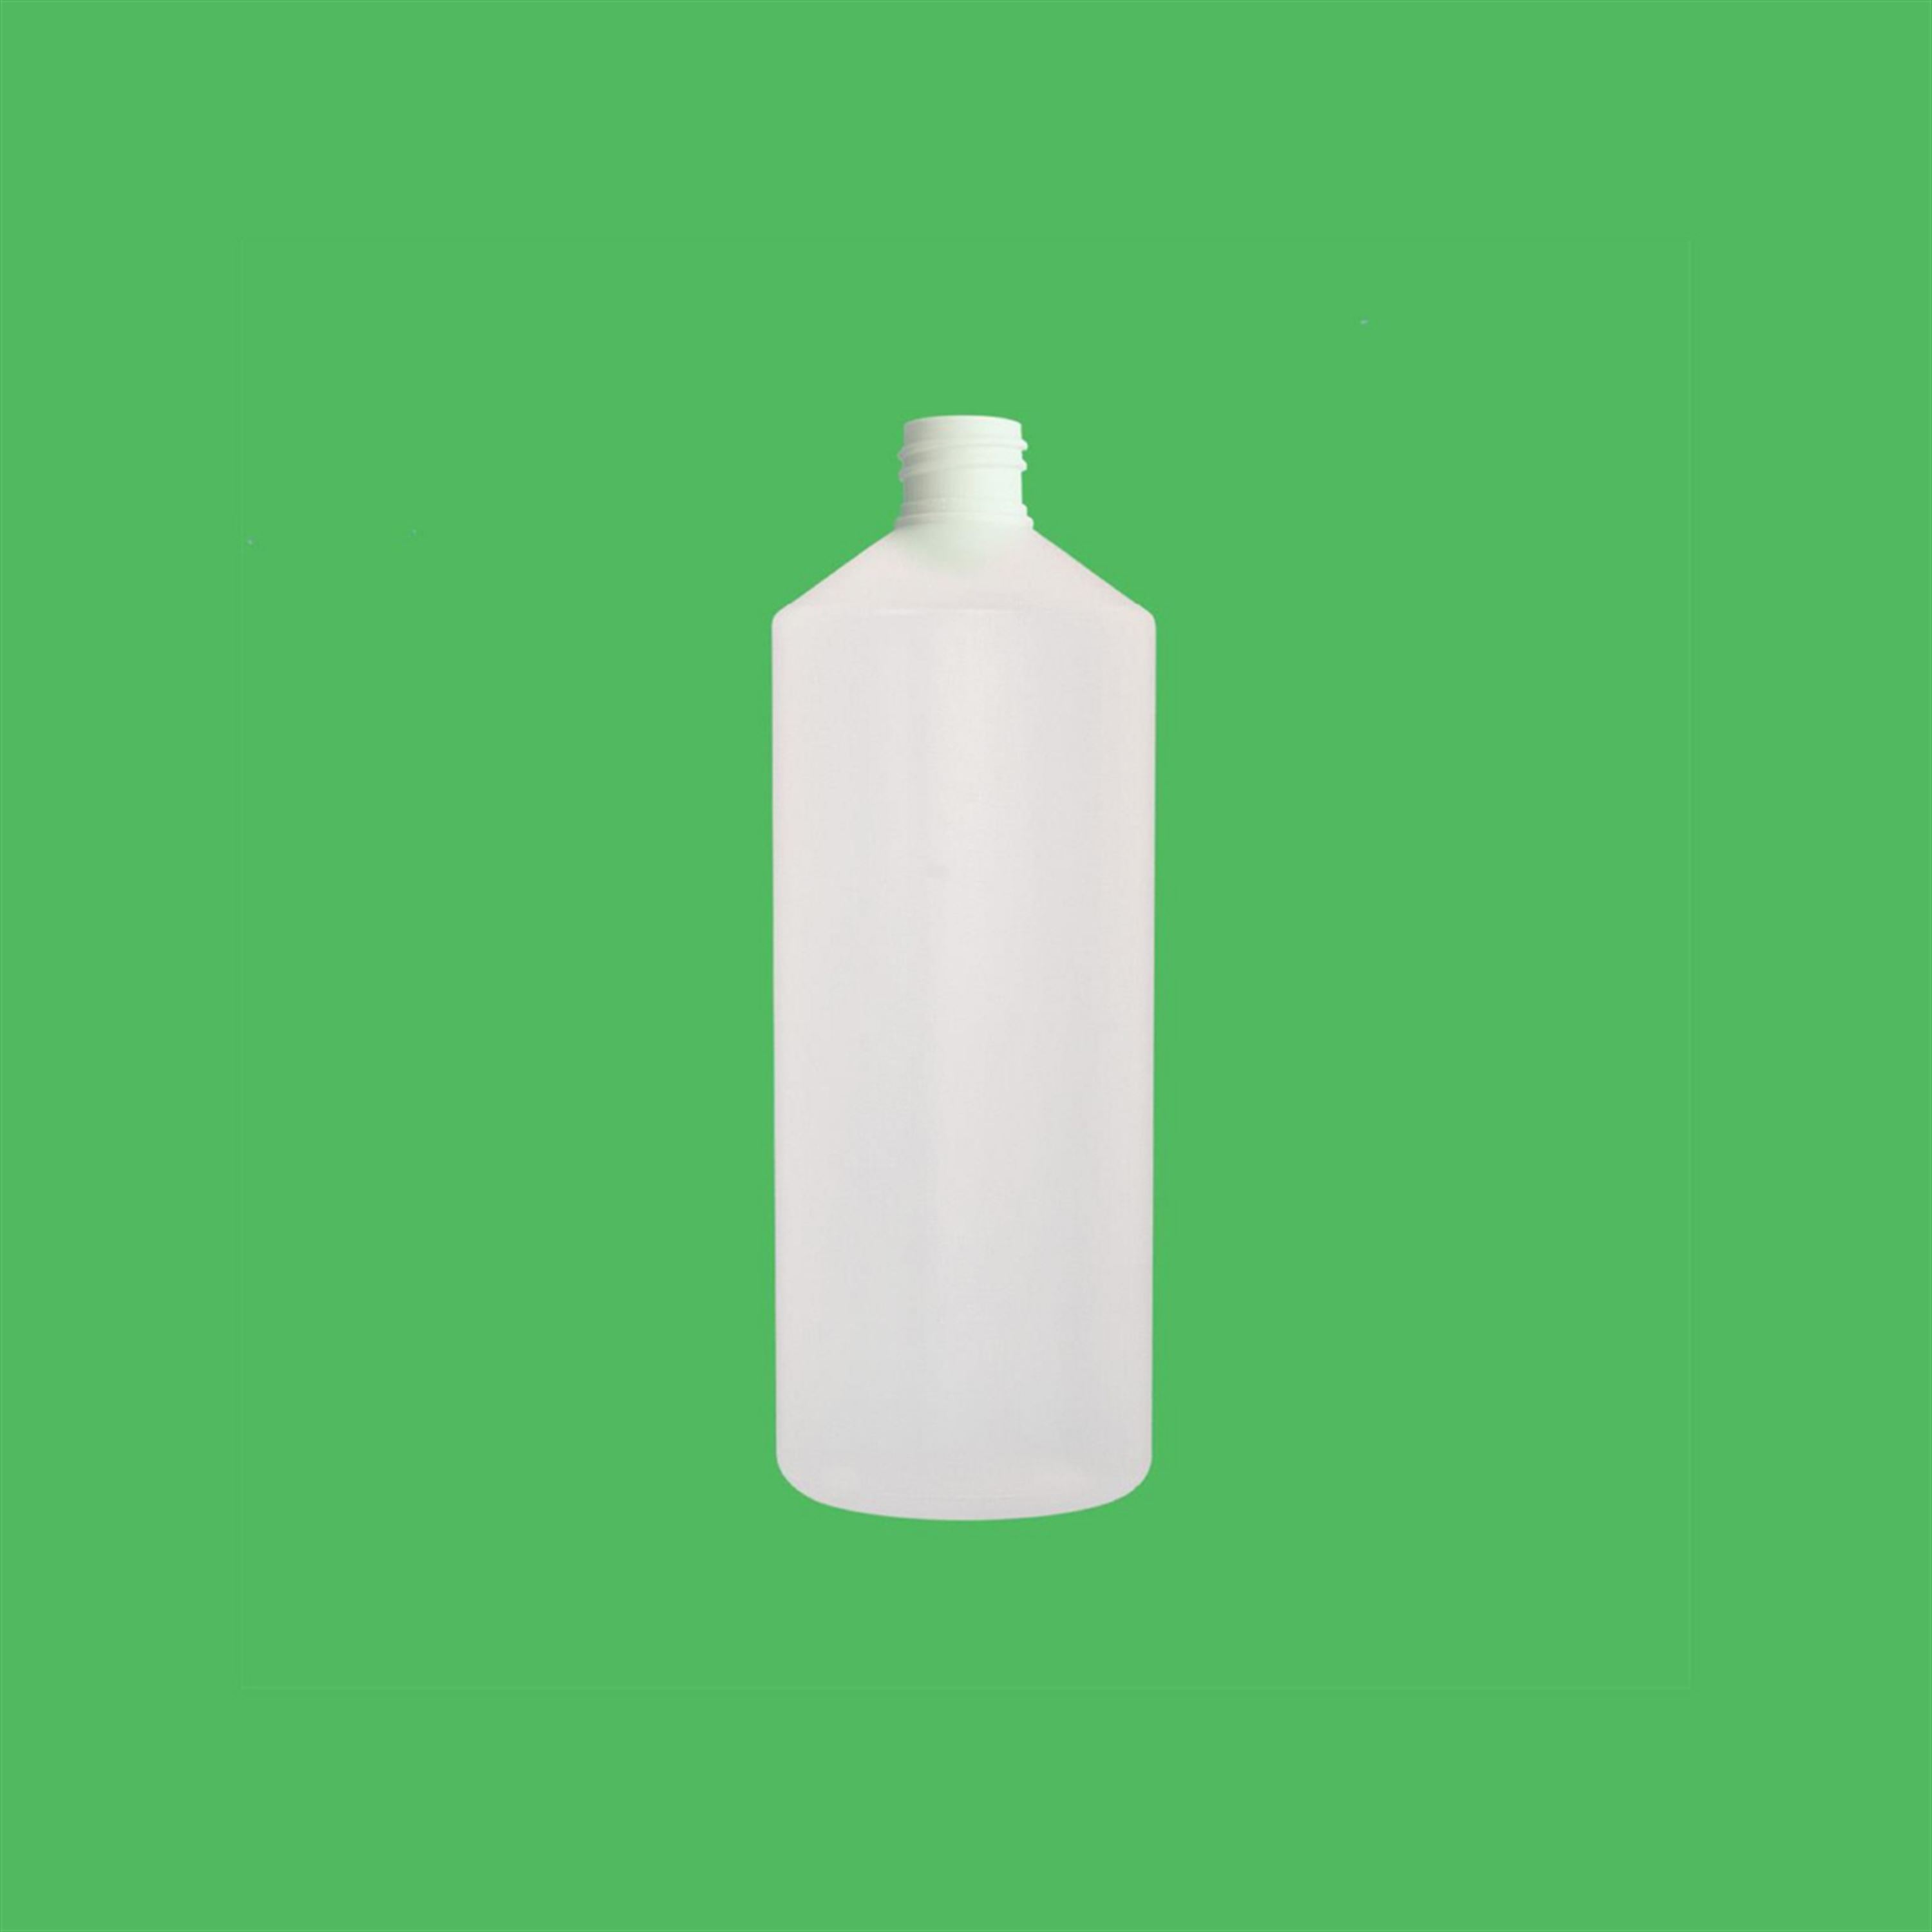 First Milk Jug with PCR Coming Soon